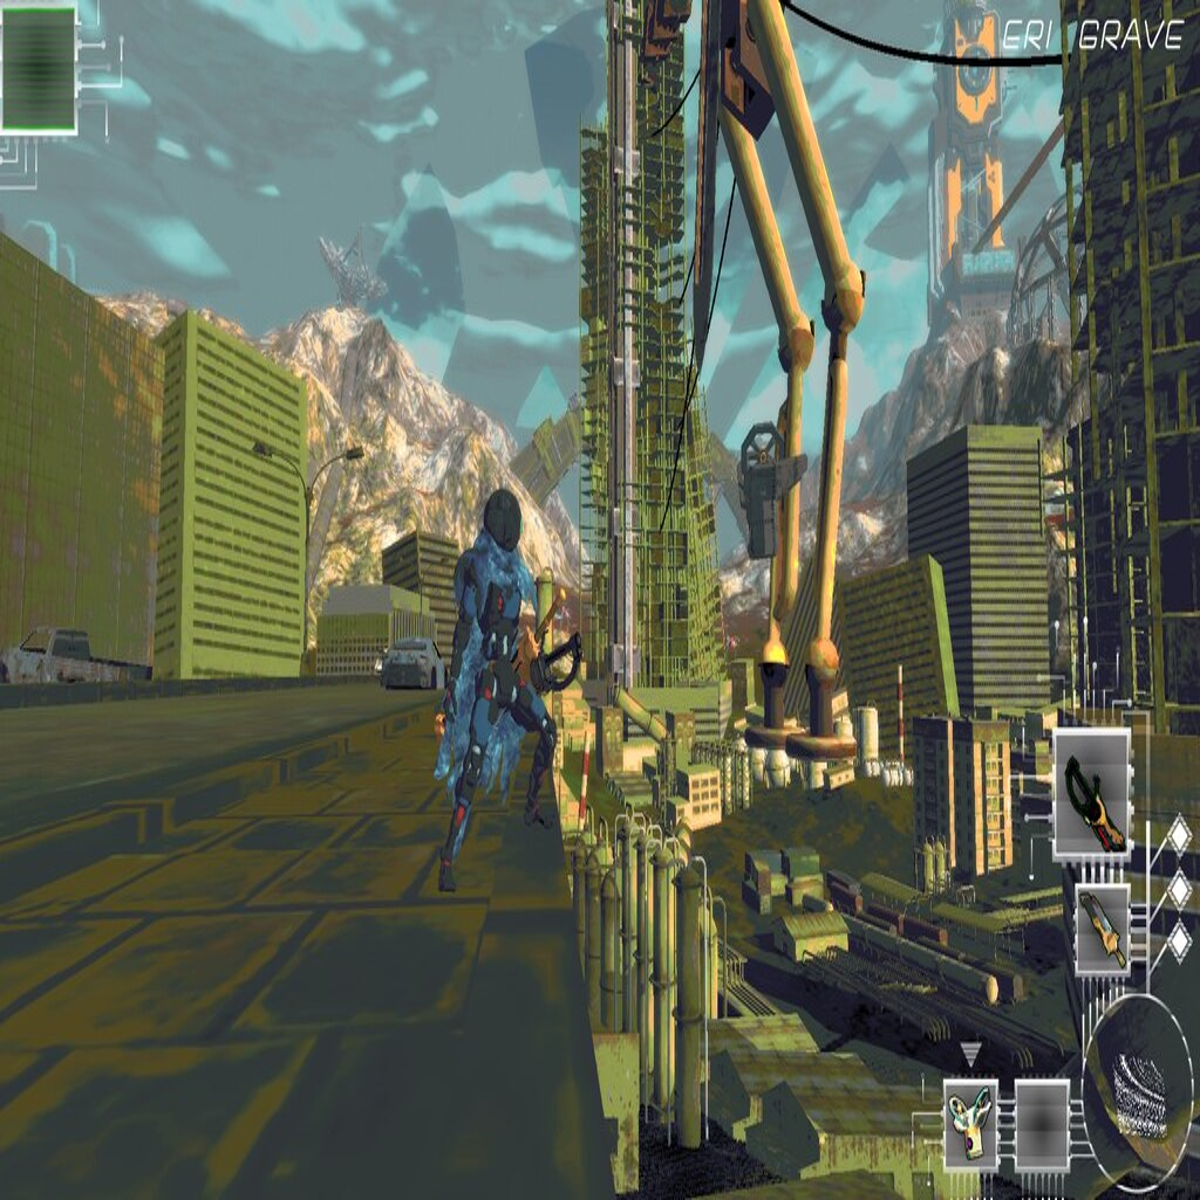 V.A Proxy: An Open-World Solo-Developed Game Inspired by Nier and